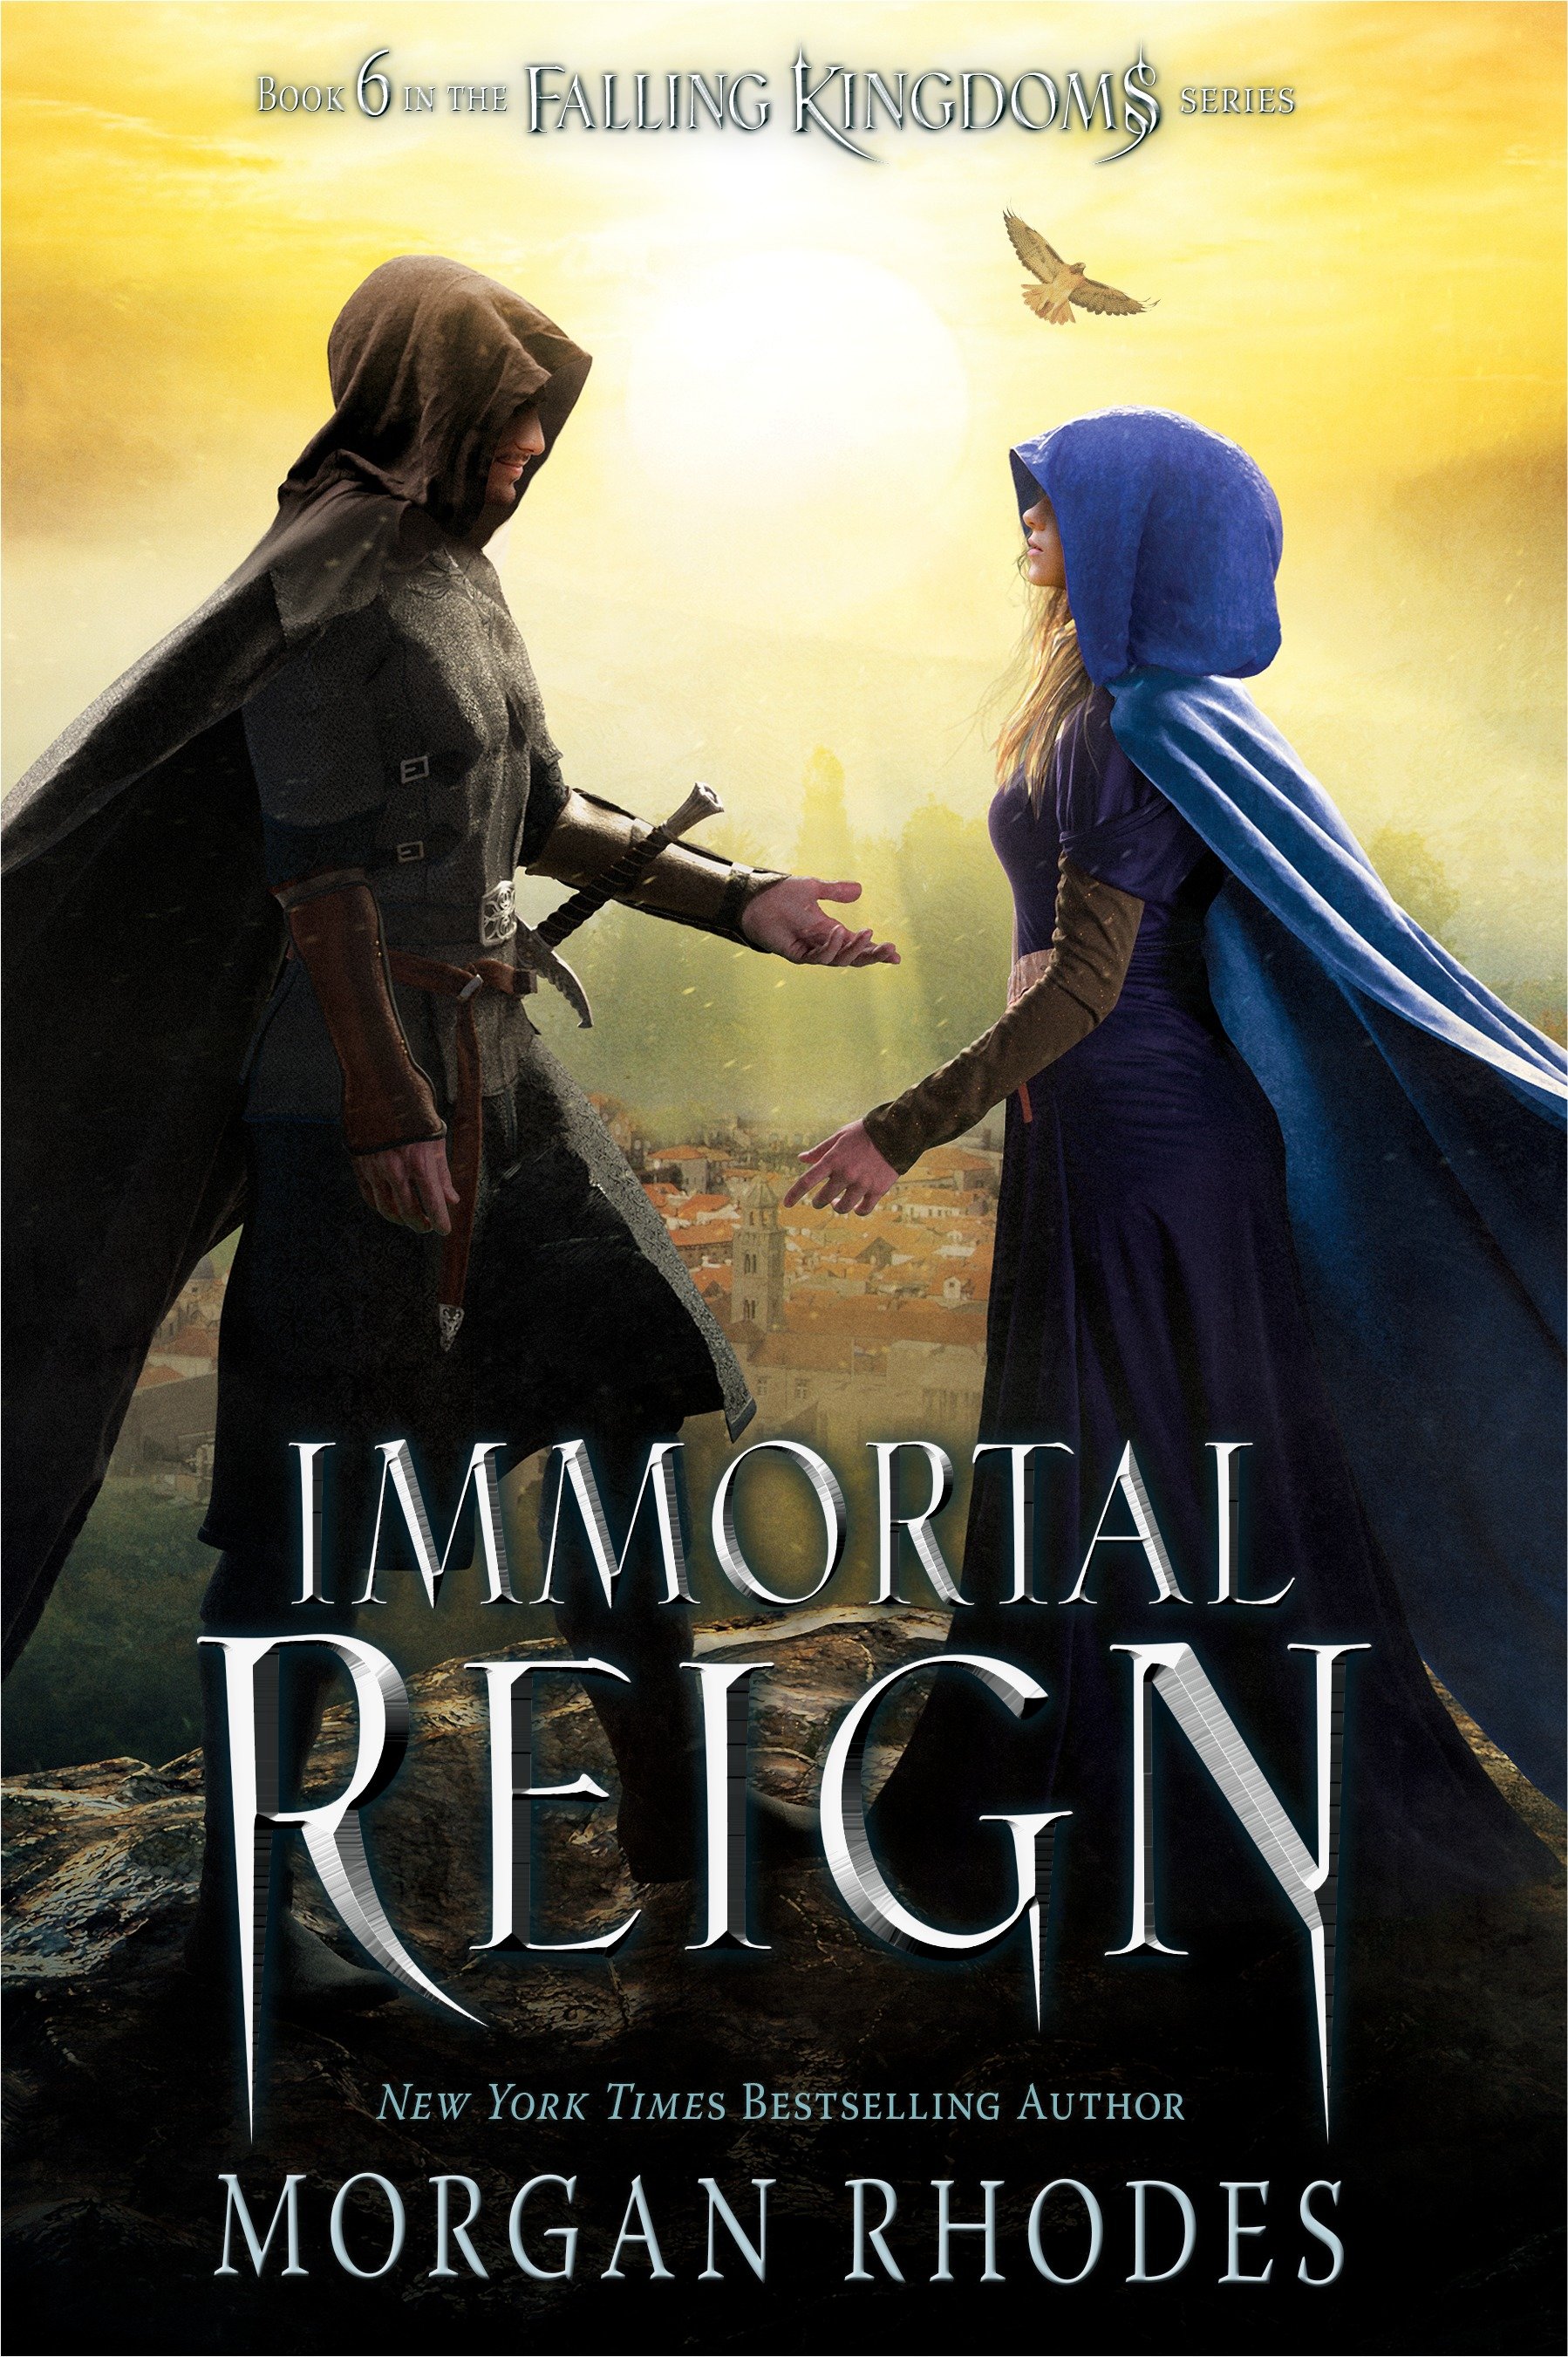 Immortal reign book 6 in the Falling kingdoms series cover image